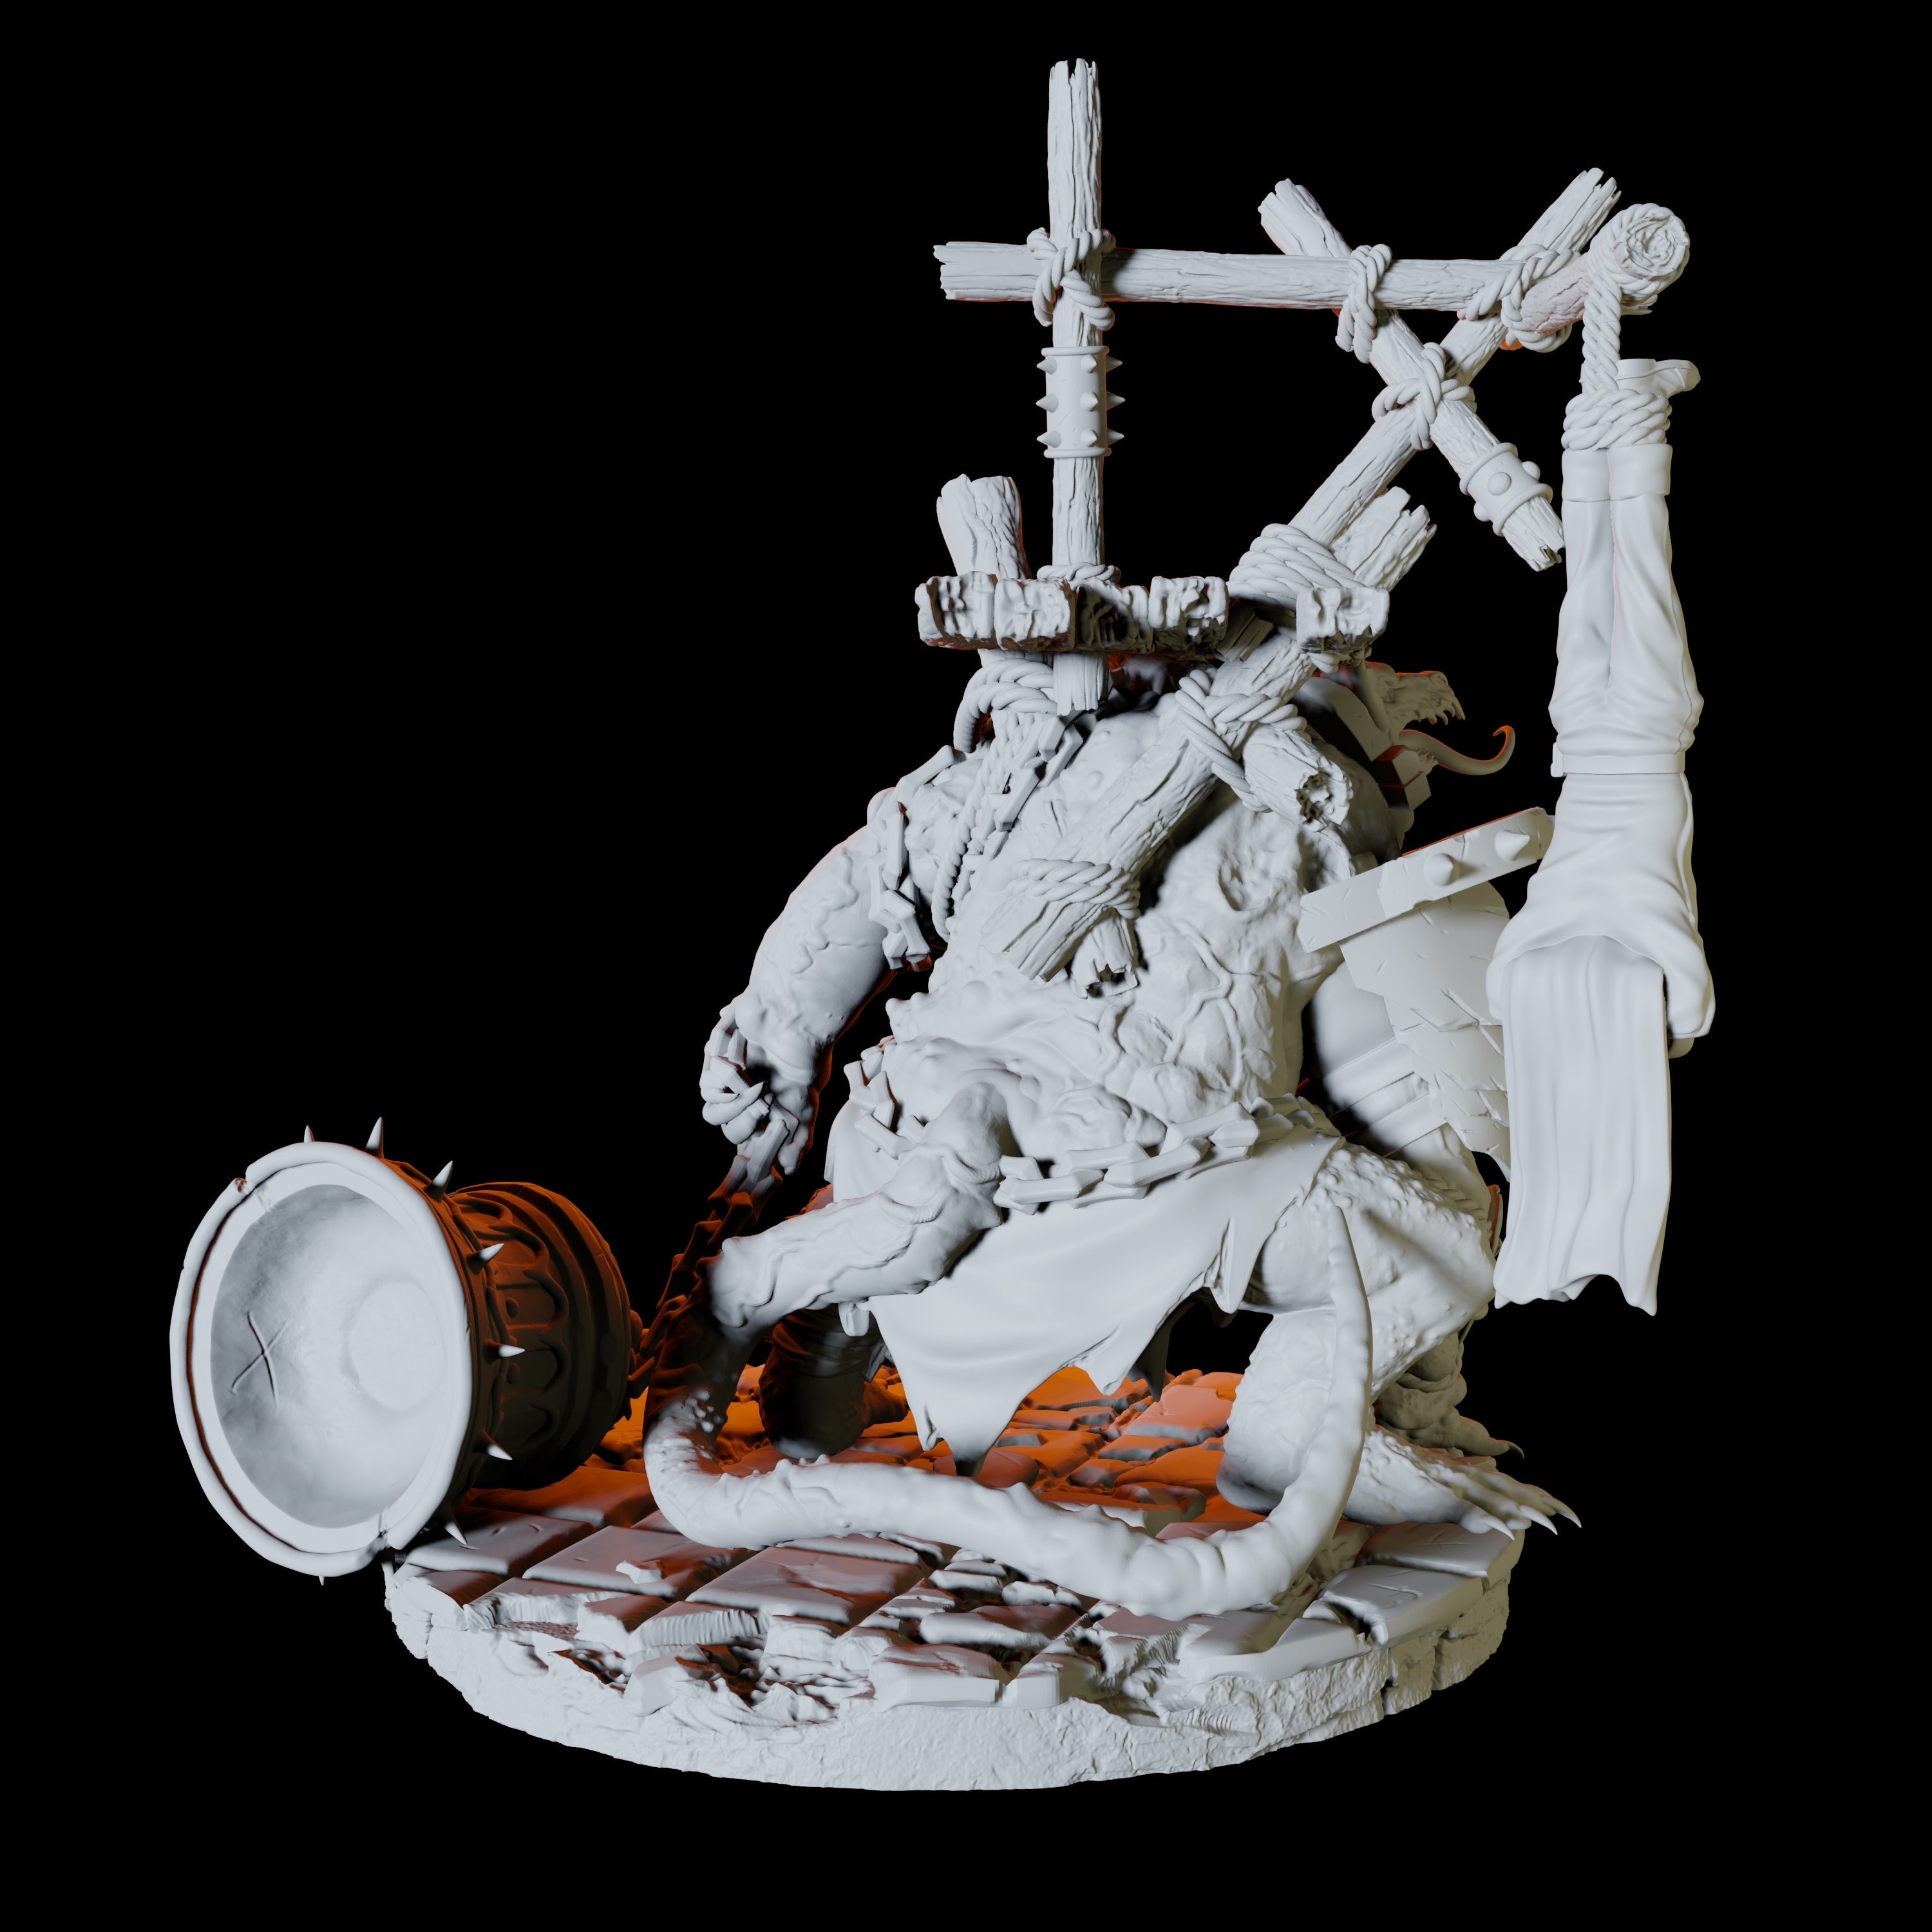 Gallows Ratfolk Champion Miniature for Dungeons and Dragons, Pathfinder or other TTRPGs